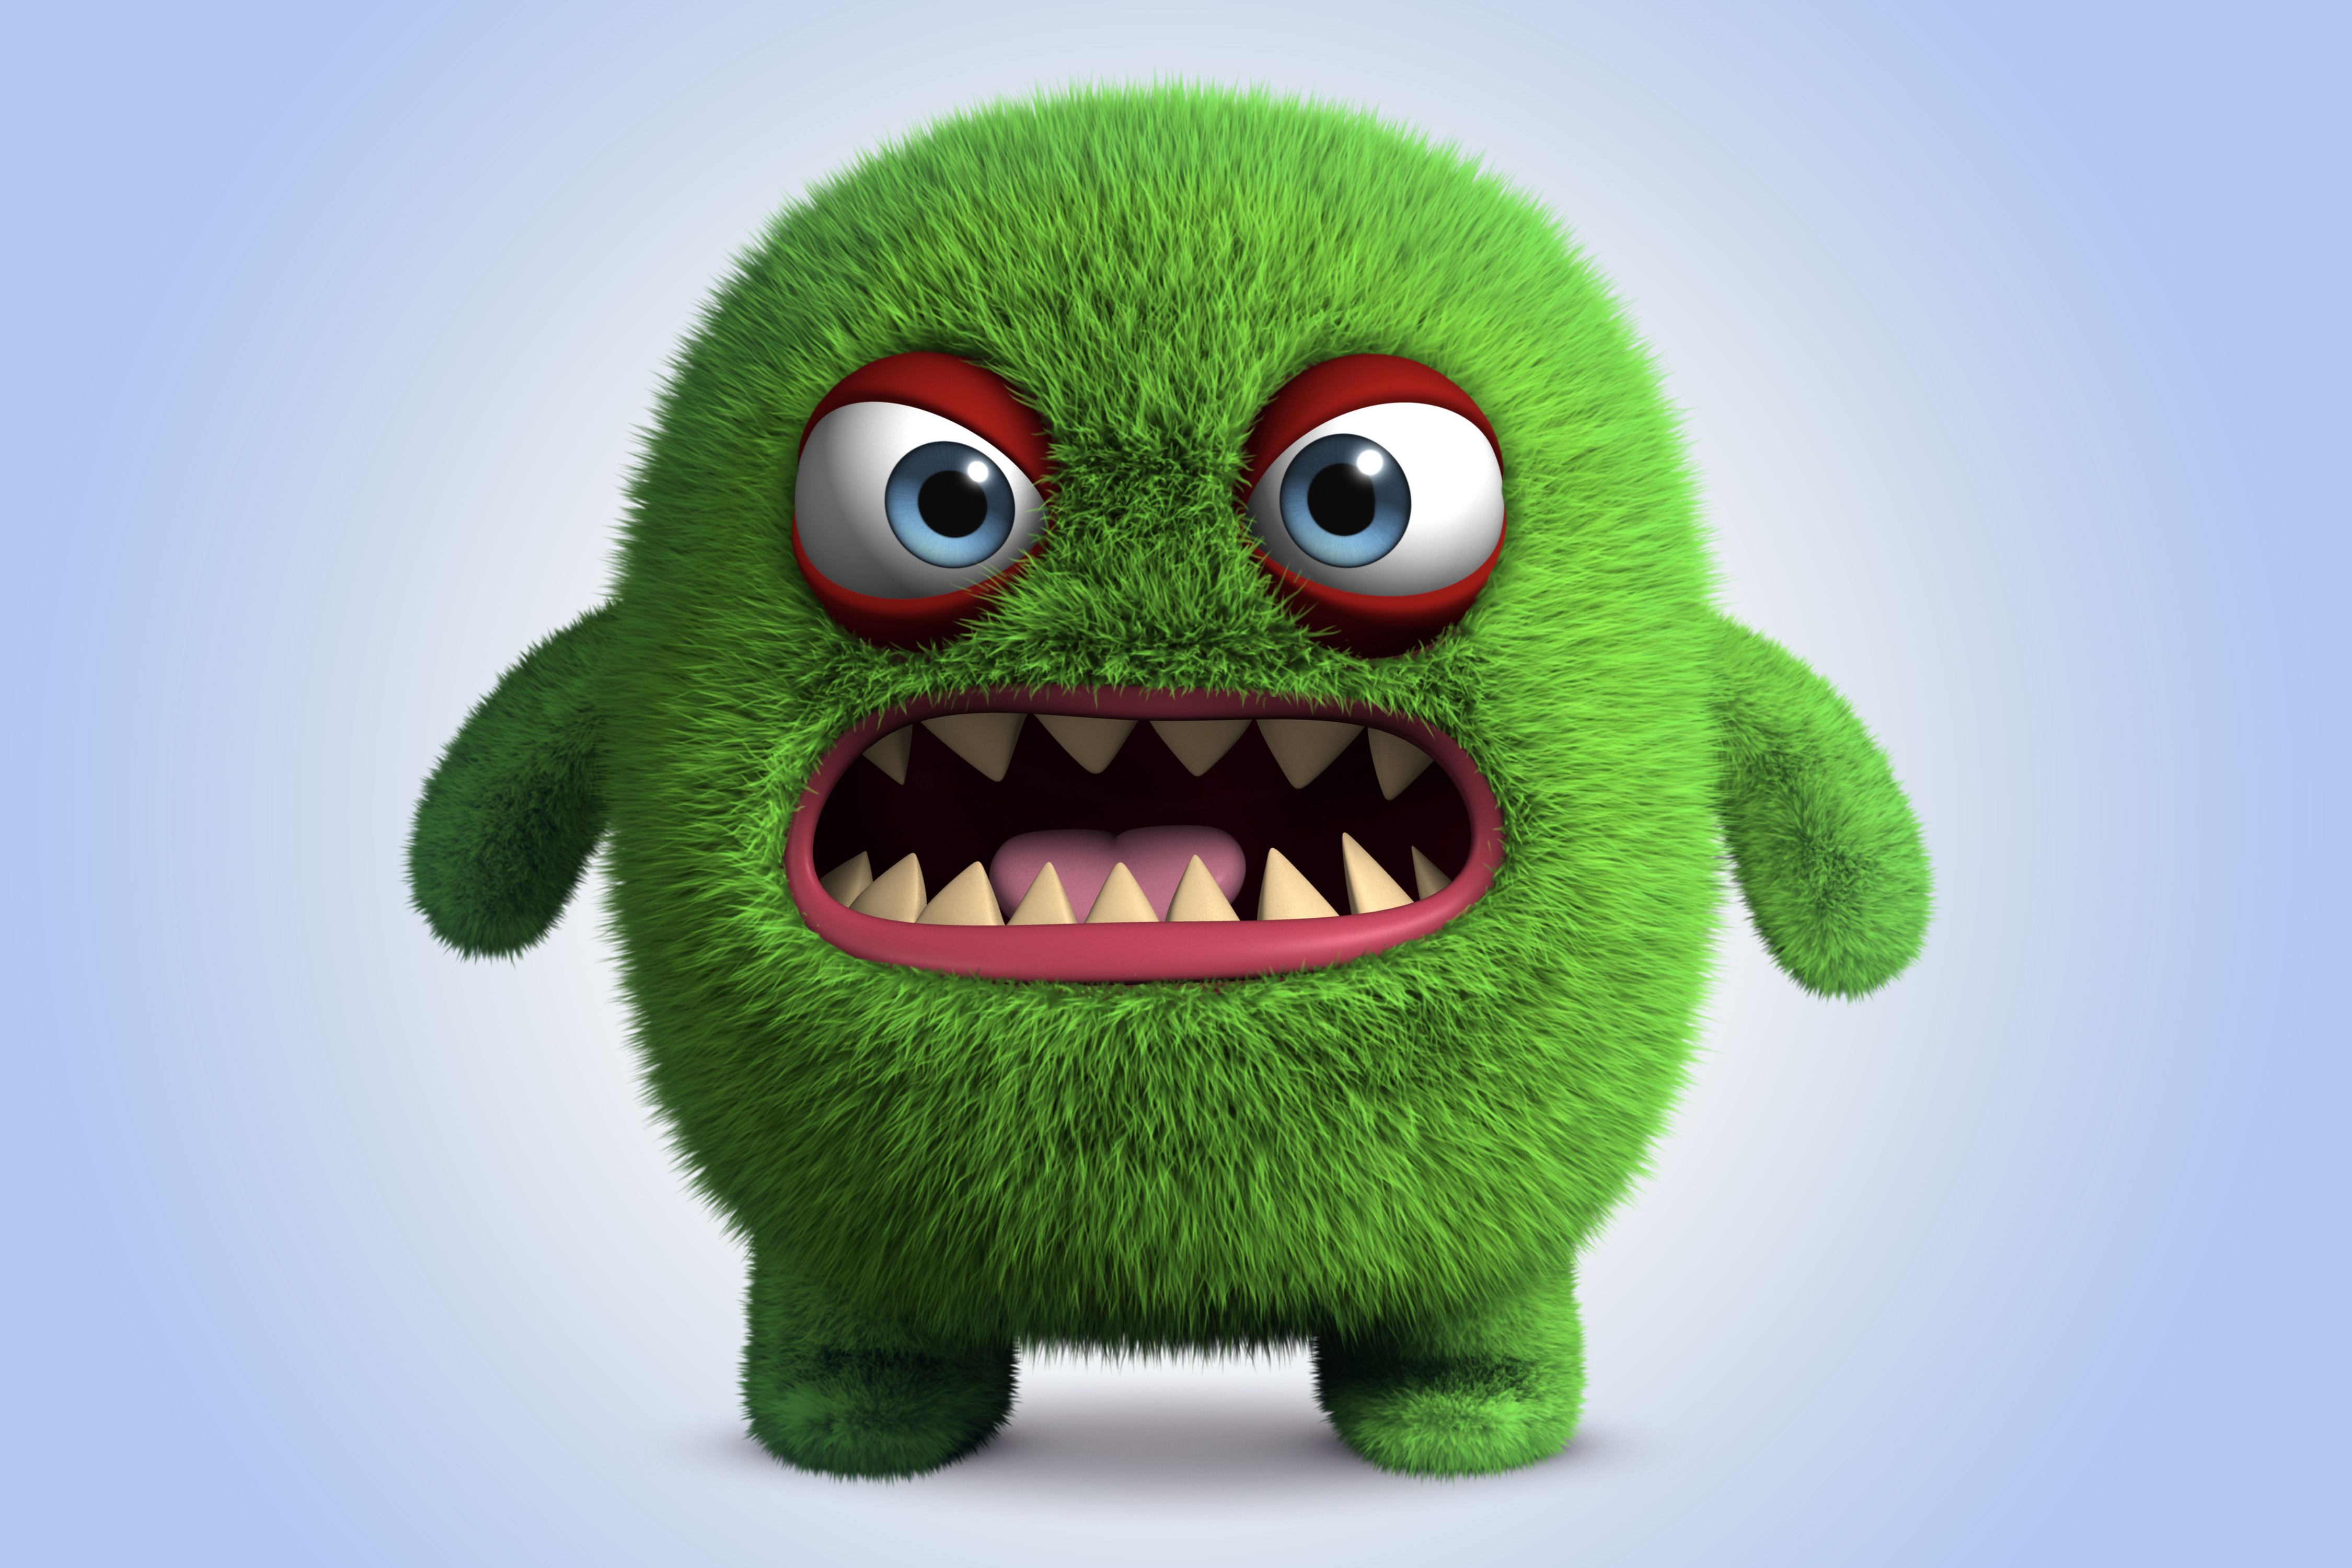 Monster Cartoon Cute Fluffy Angry Character Wallpaper